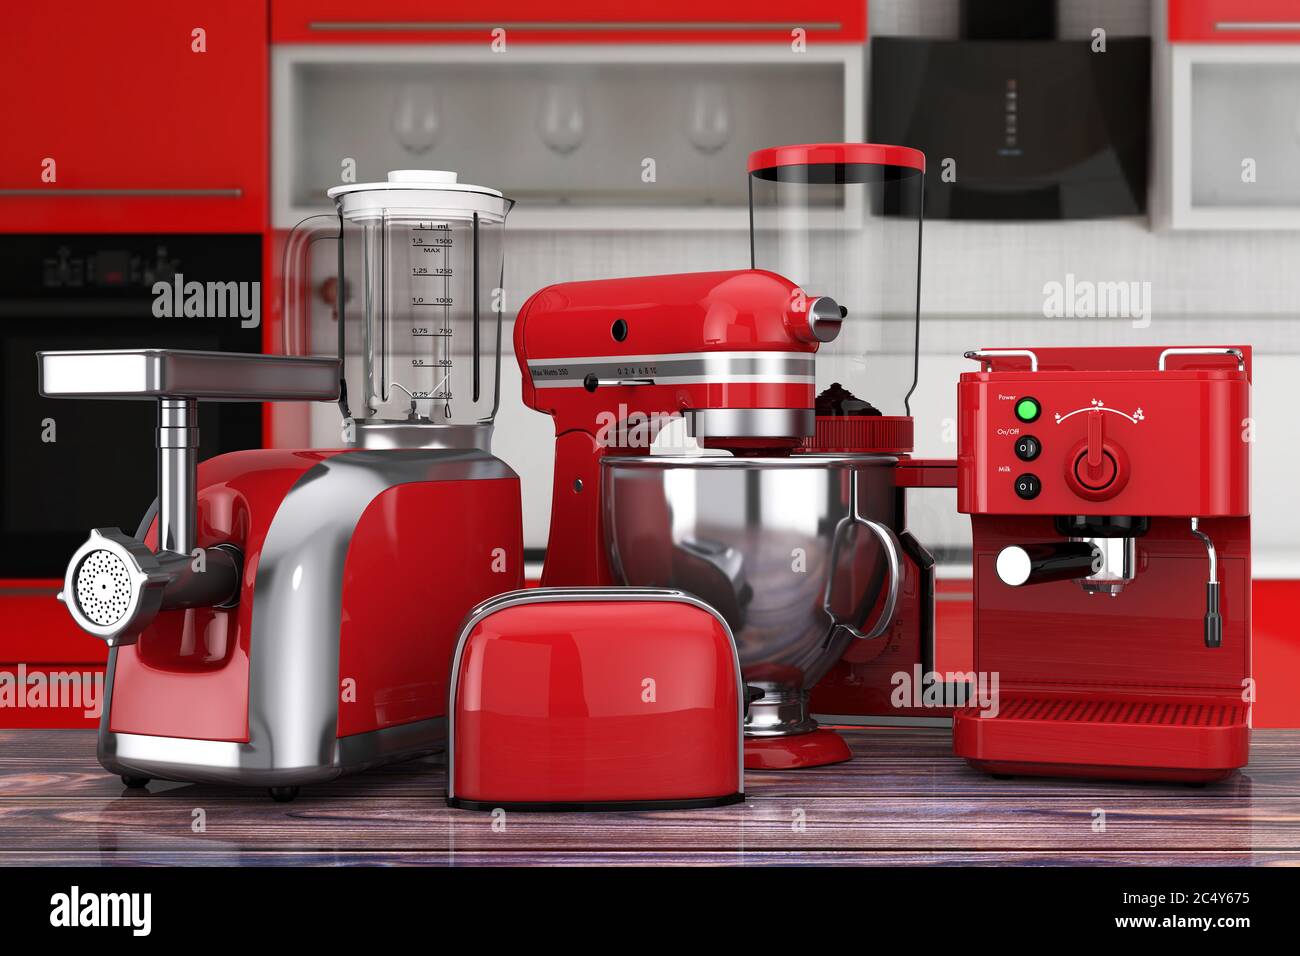 https://c8.alamy.com/comp/2C4Y675/kitchen-appliances-set-red-blender-toaster-coffee-machine-meat-ginder-food-mixer-and-coffee-grinder-on-a-wooden-table-3d-rendering-2C4Y675.jpg